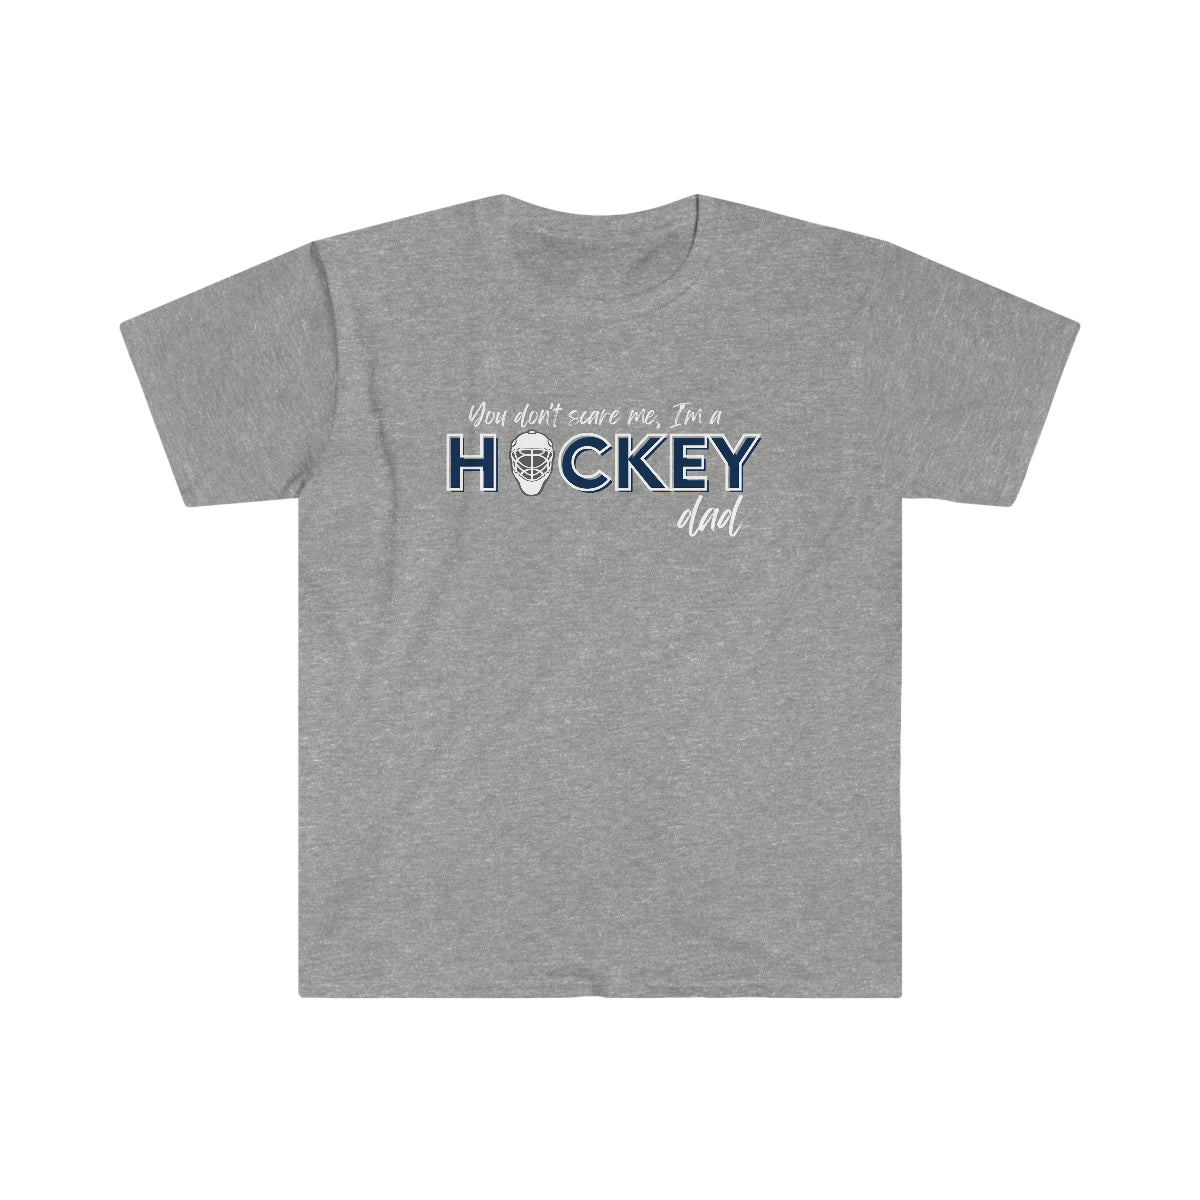 You don't scare me, I'm a Hockey Dad - Men's Tee